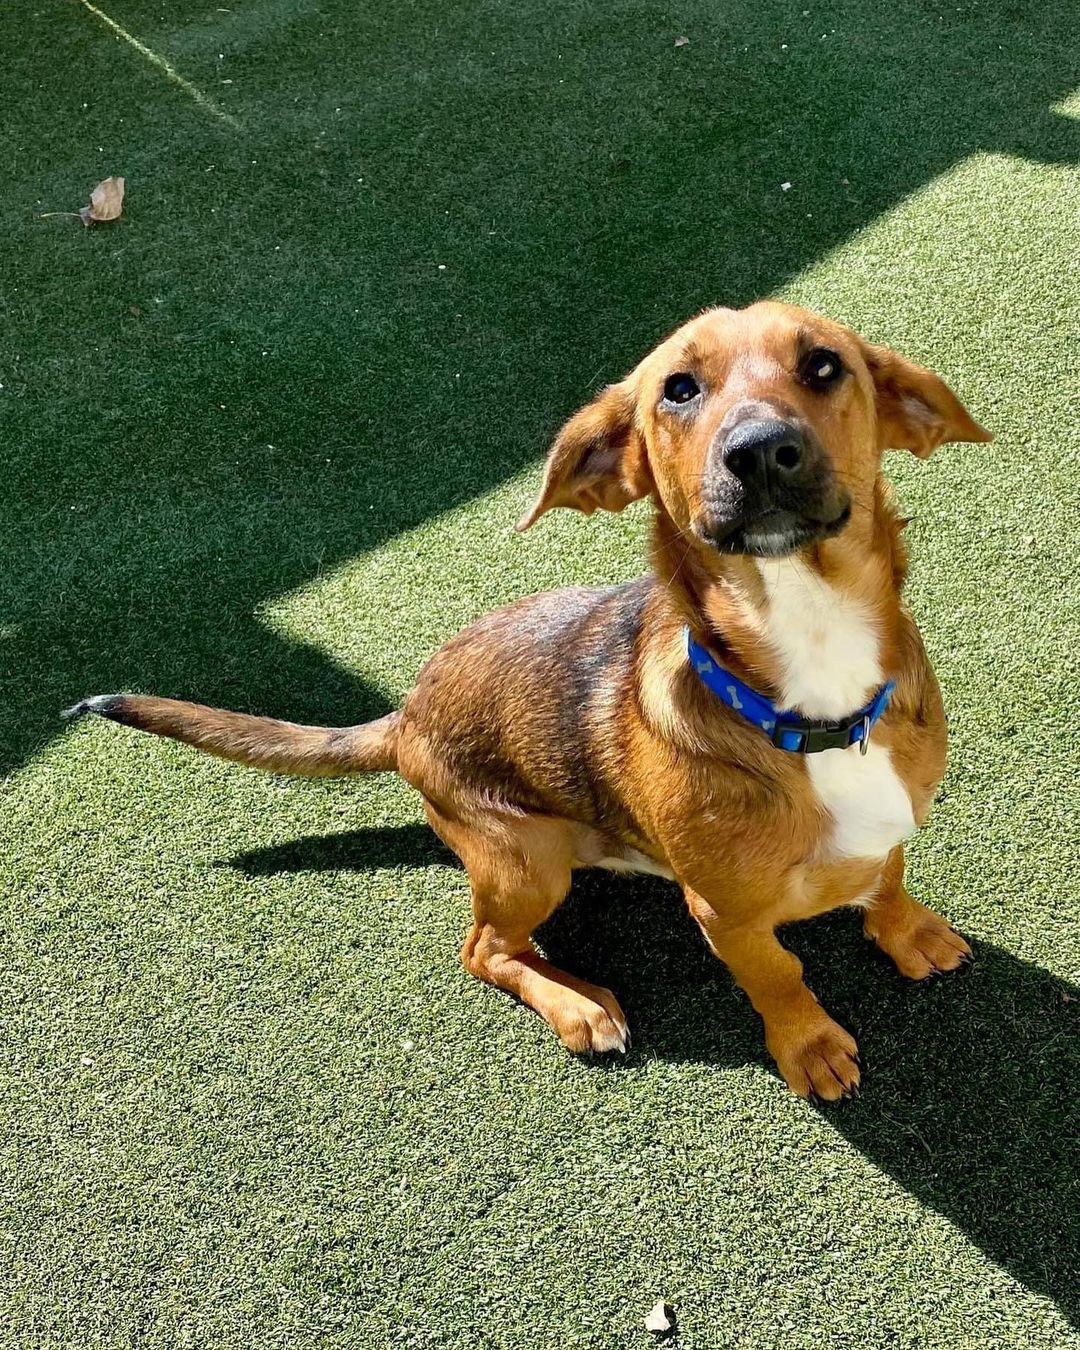 The cuuuutest S H O R T Y you’ll meet .. sweet basset mix Garland! 🤎🖤

This 10 month old little boy came to us from Pocahontas, AR. Garland was living in a home with cats, dogs and people and loved everyone. Let me say that again - he is wonderful with cats, dogs and kids!! He is gentle and loving and has such a good demeanor. He is also potty trained and has great manners. 🤎🖤

Truly, Garland would be perfect for any home! Fill out an app to meet him or foster him today … he’s even cuter (and sweeter) in person. 🤎🖤

<a target='_blank' href='https://www.instagram.com/explore/tags/adoptme/'>#adoptme</a> <a target='_blank' href='https://www.instagram.com/explore/tags/bassetmix/'>#bassetmix</a> <a target='_blank' href='https://www.instagram.com/explore/tags/kidfriendly/'>#kidfriendly</a> <a target='_blank' href='https://www.instagram.com/explore/tags/catfriendly/'>#catfriendly</a> <a target='_blank' href='https://www.instagram.com/explore/tags/rescuedog/'>#rescuedog</a> <a target='_blank' href='https://www.instagram.com/explore/tags/shorty/'>#shorty</a> <a target='_blank' href='https://www.instagram.com/explore/tags/dogsofstl/'>#dogsofstl</a> <a target='_blank' href='https://www.instagram.com/explore/tags/familydog/'>#familydog</a> <a target='_blank' href='https://www.instagram.com/explore/tags/dogsofstlouis/'>#dogsofstlouis</a> <a target='_blank' href='https://www.instagram.com/explore/tags/gentleman/'>#gentleman</a> <a target='_blank' href='https://www.instagram.com/explore/tags/spayandneuter/'>#spayandneuter</a> <a target='_blank' href='https://www.instagram.com/explore/tags/fosteringsaveslives/'>#fosteringsaveslives</a> <a target='_blank' href='https://www.instagram.com/explore/tags/blackandtan/'>#blackandtan</a> <a target='_blank' href='https://www.instagram.com/explore/tags/shelterdog/'>#shelterdog</a> <a target='_blank' href='https://www.instagram.com/explore/tags/baby/'>#baby</a>